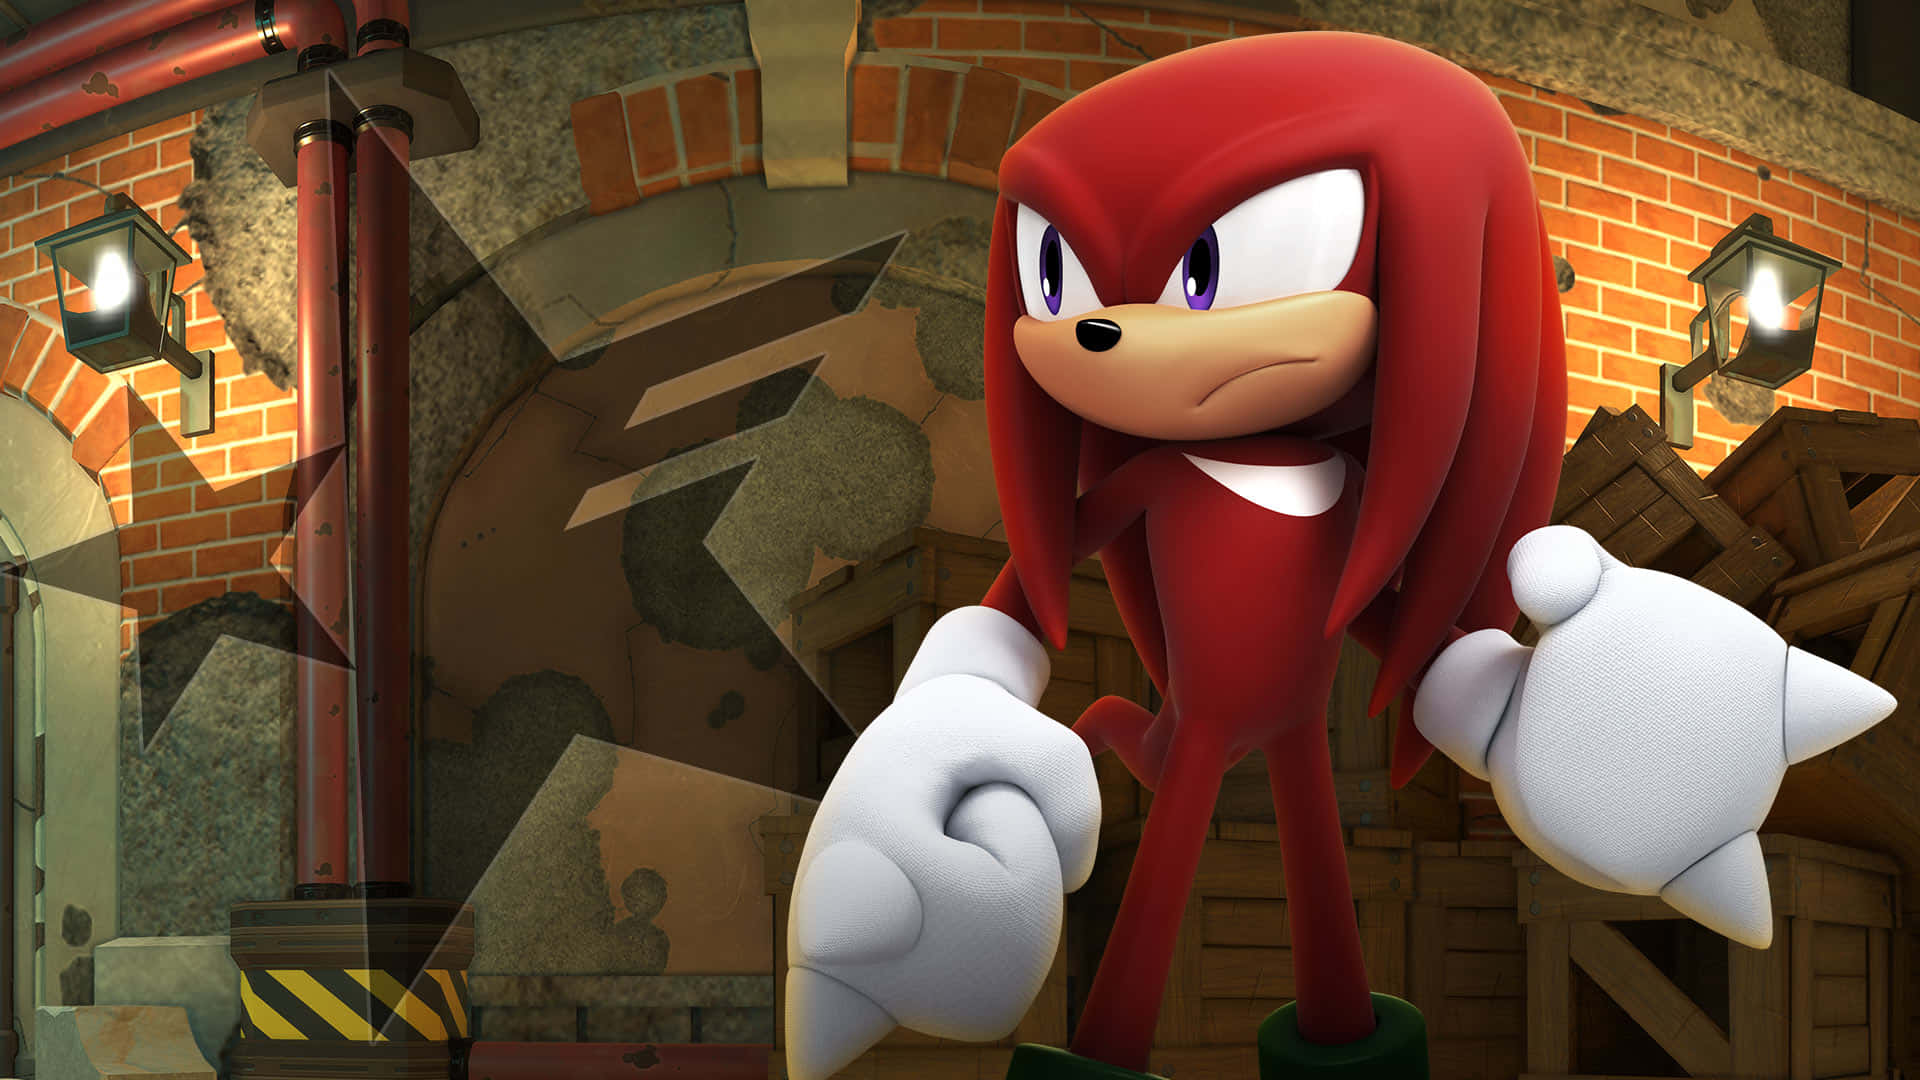 sonic the hedgehog in a red outfit standing in front of a brick wall Wallpaper